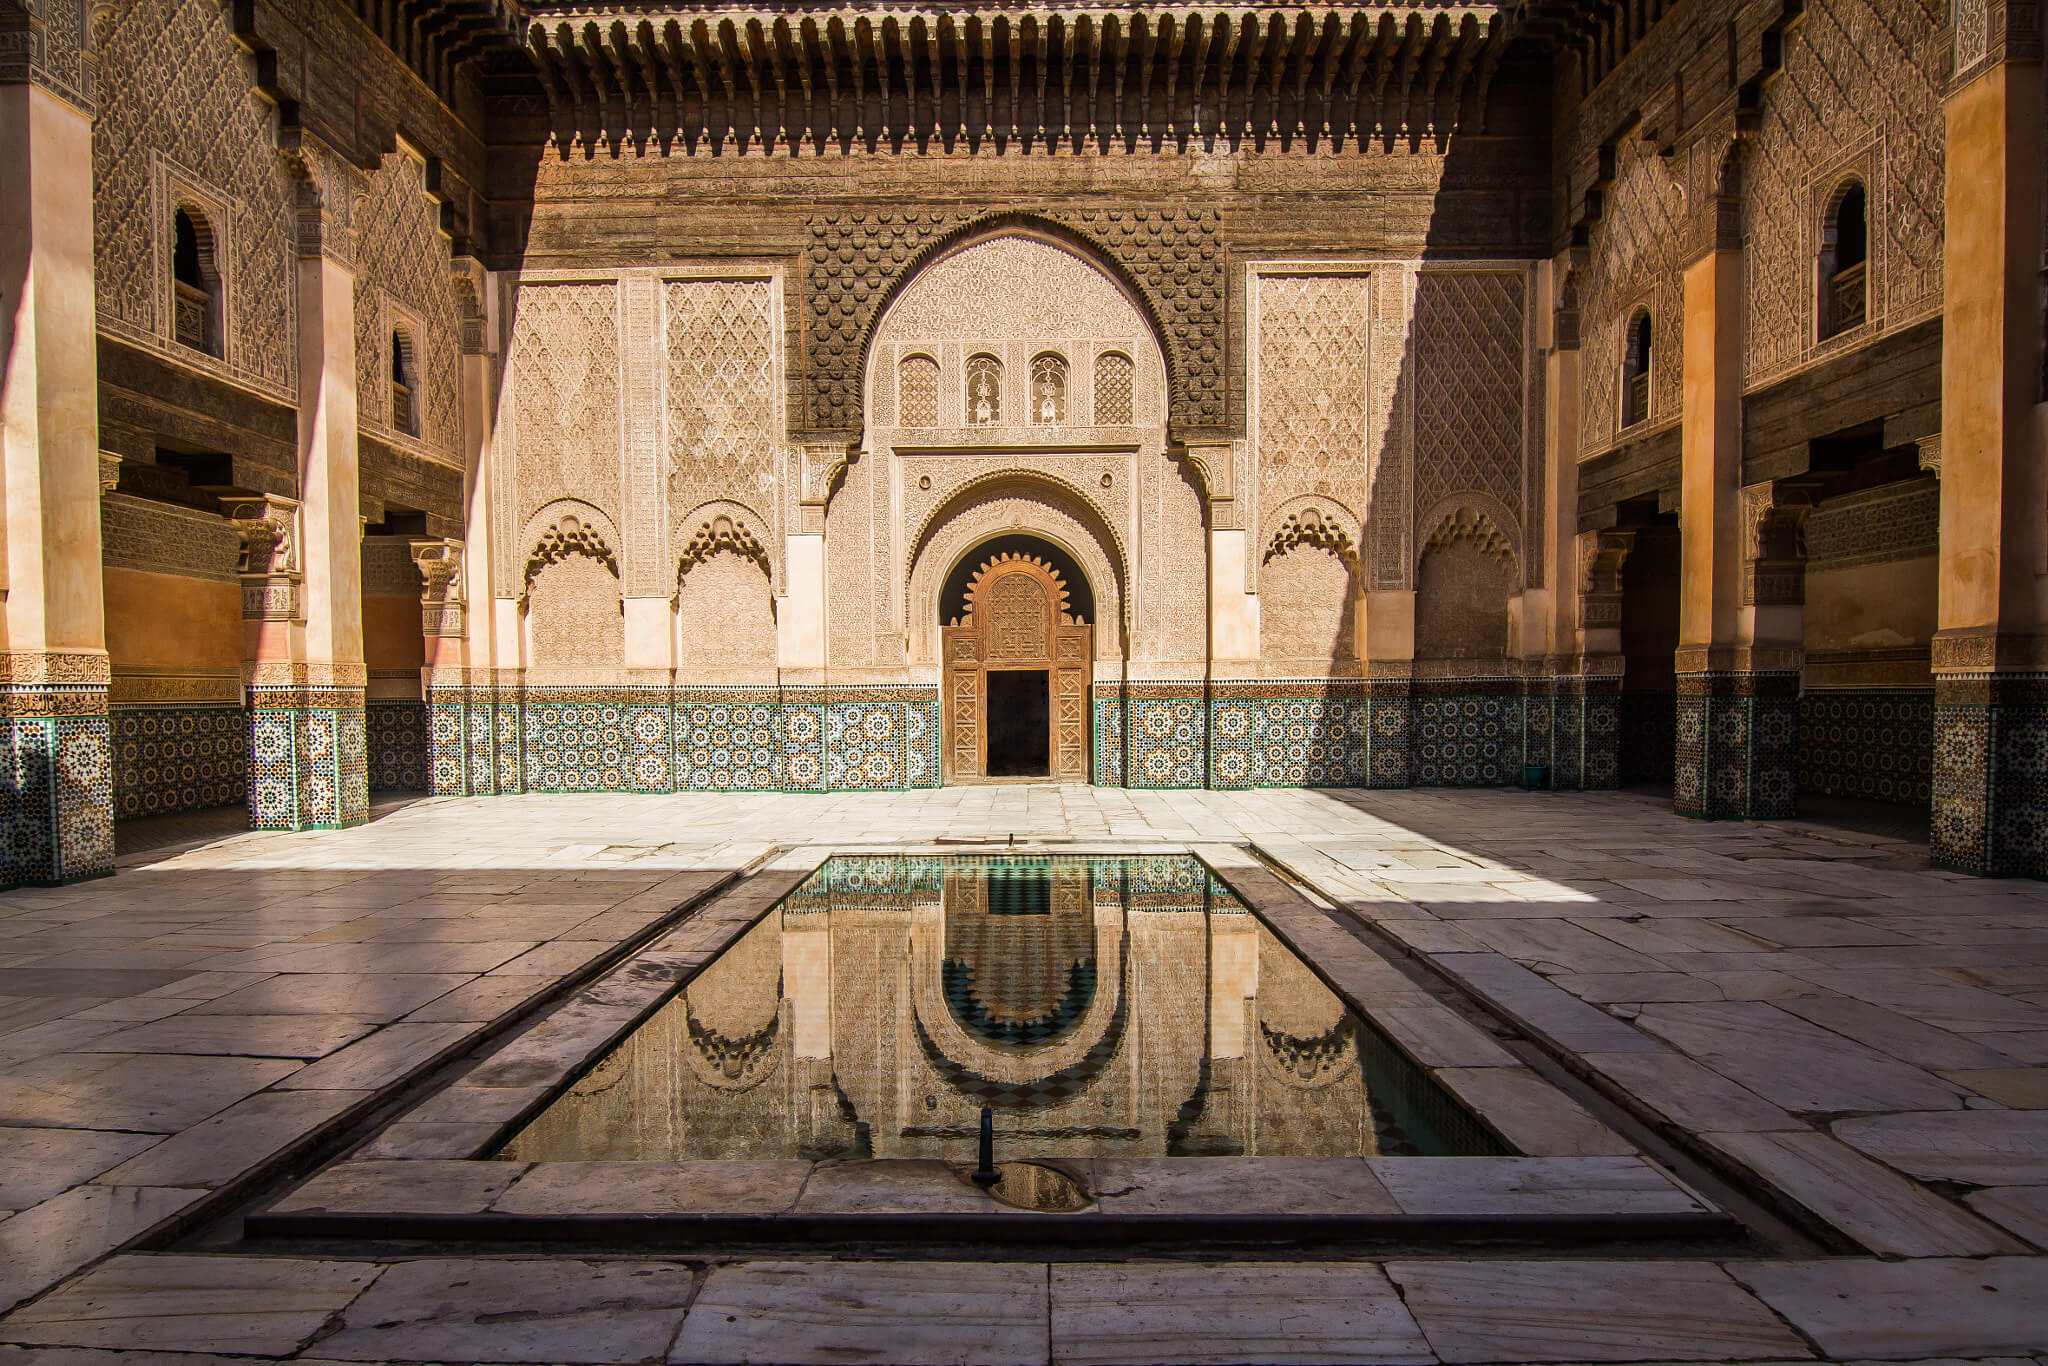 Immerse yourself in the stunning architecture and rich history of this iconic Islamic learning center.